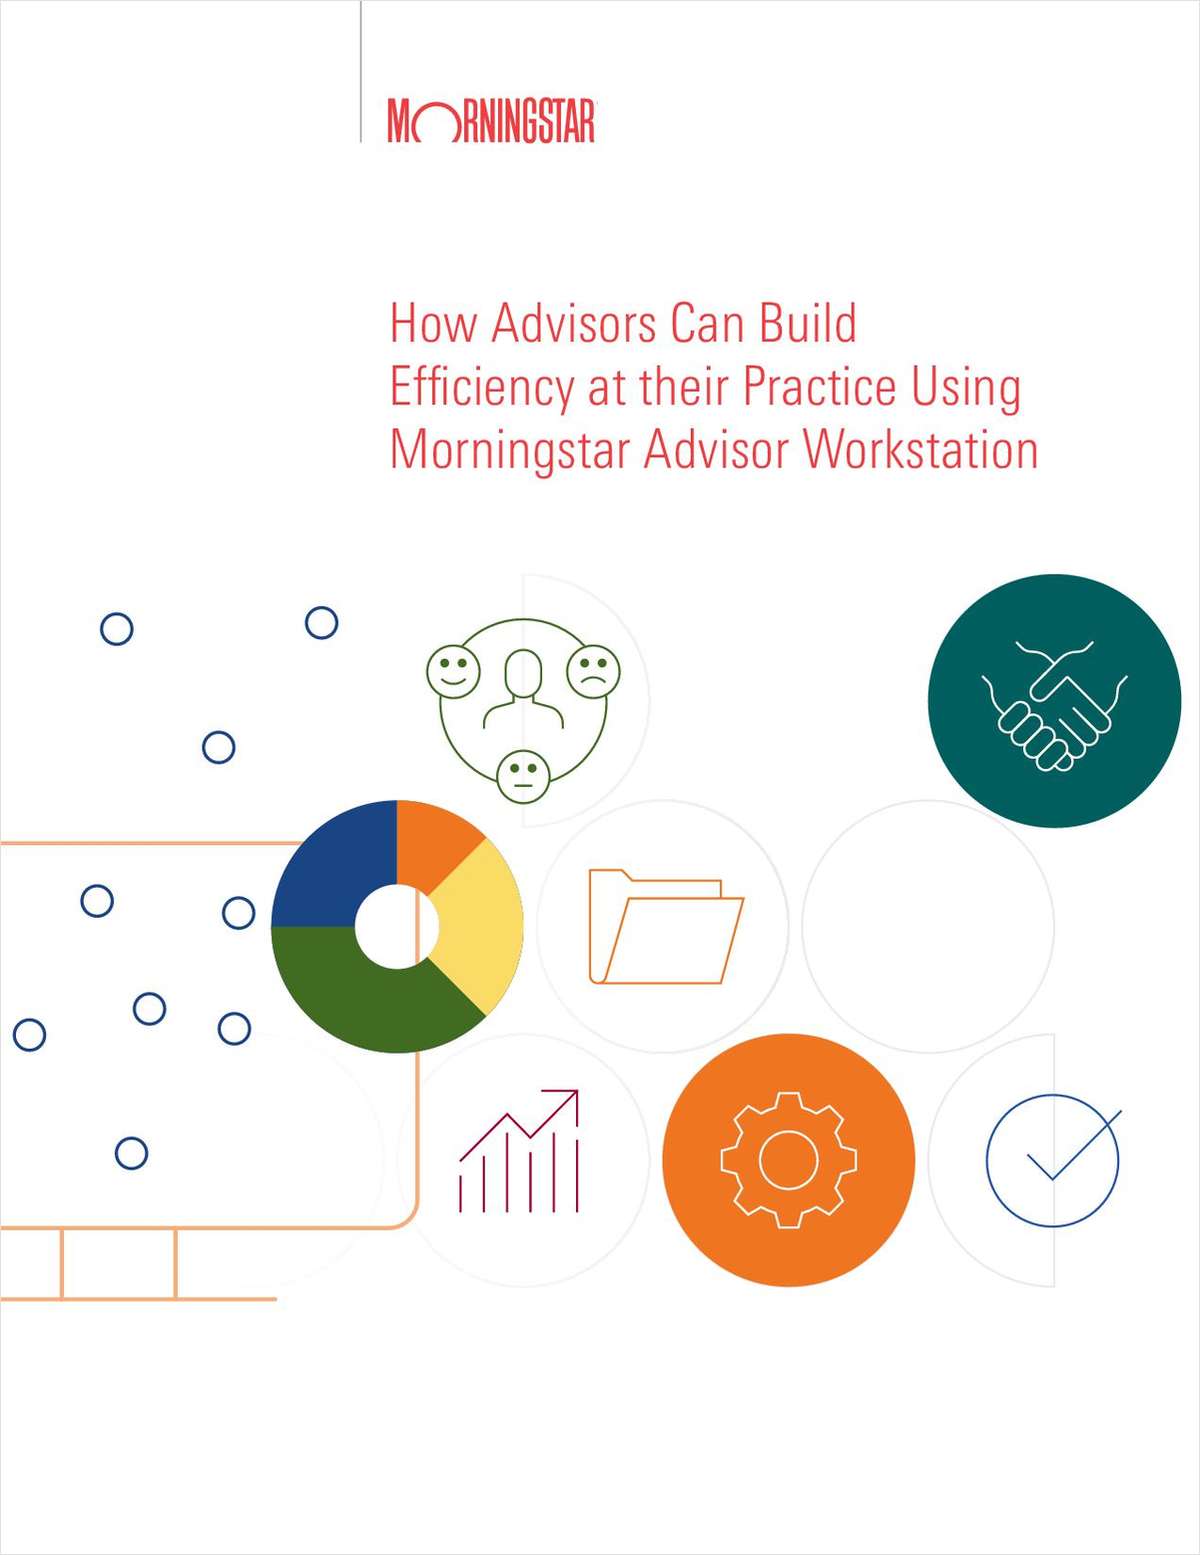 How to Build Efficiency at Your Advisory Practice